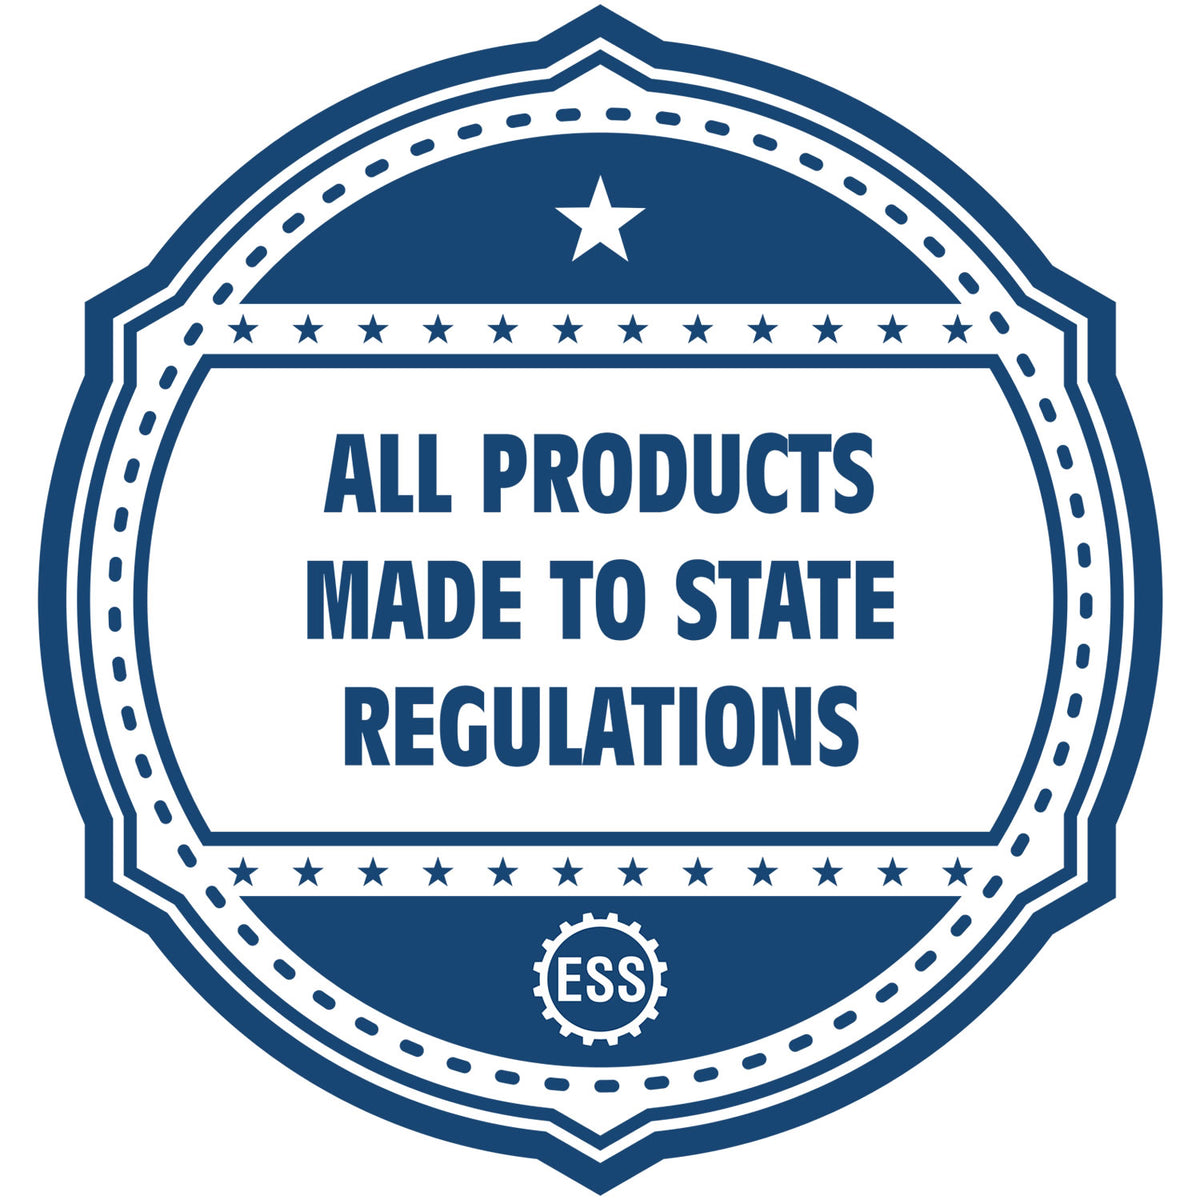 A blue icon or badge for the Heavy Duty Cast Iron Ohio Geologist Seal Embosser showing that this product is made in compliance with state regulations.